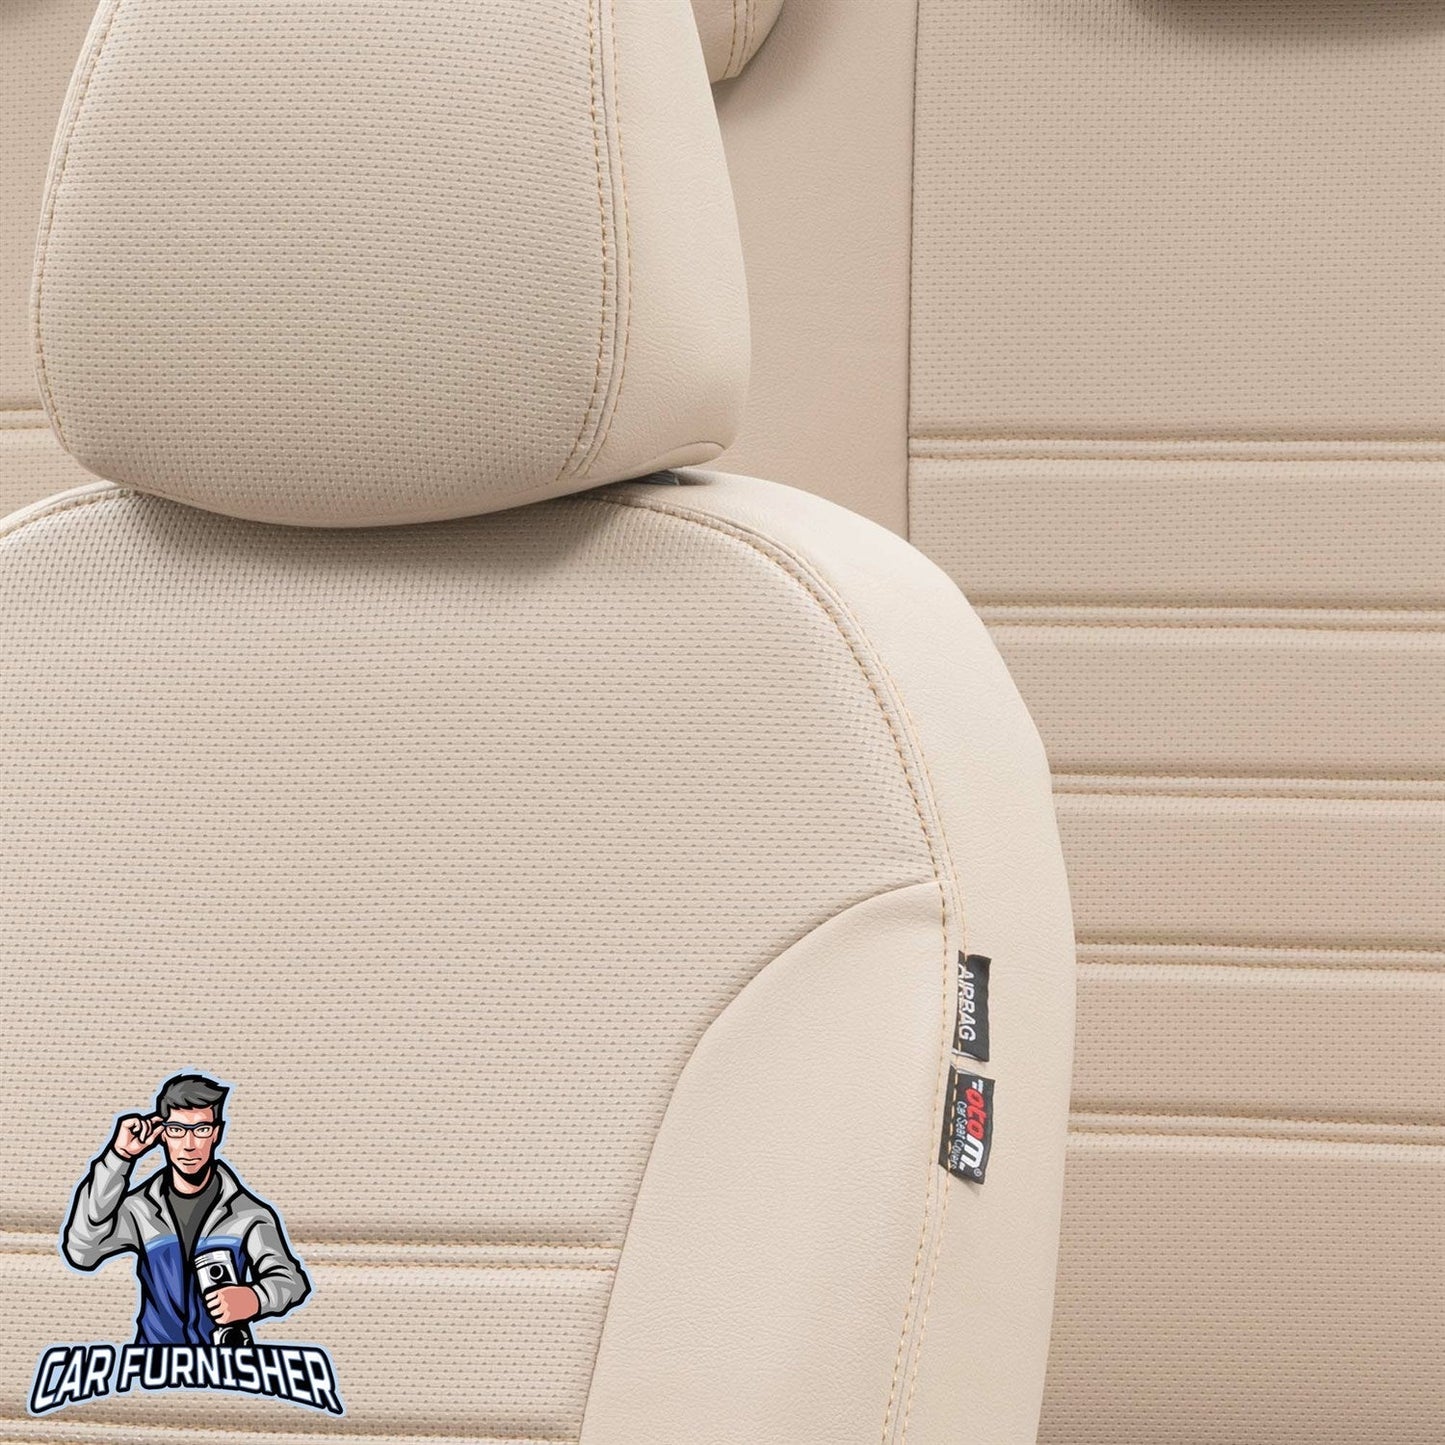 Dacia Logan Seat Covers New York Leather Design Beige Leather